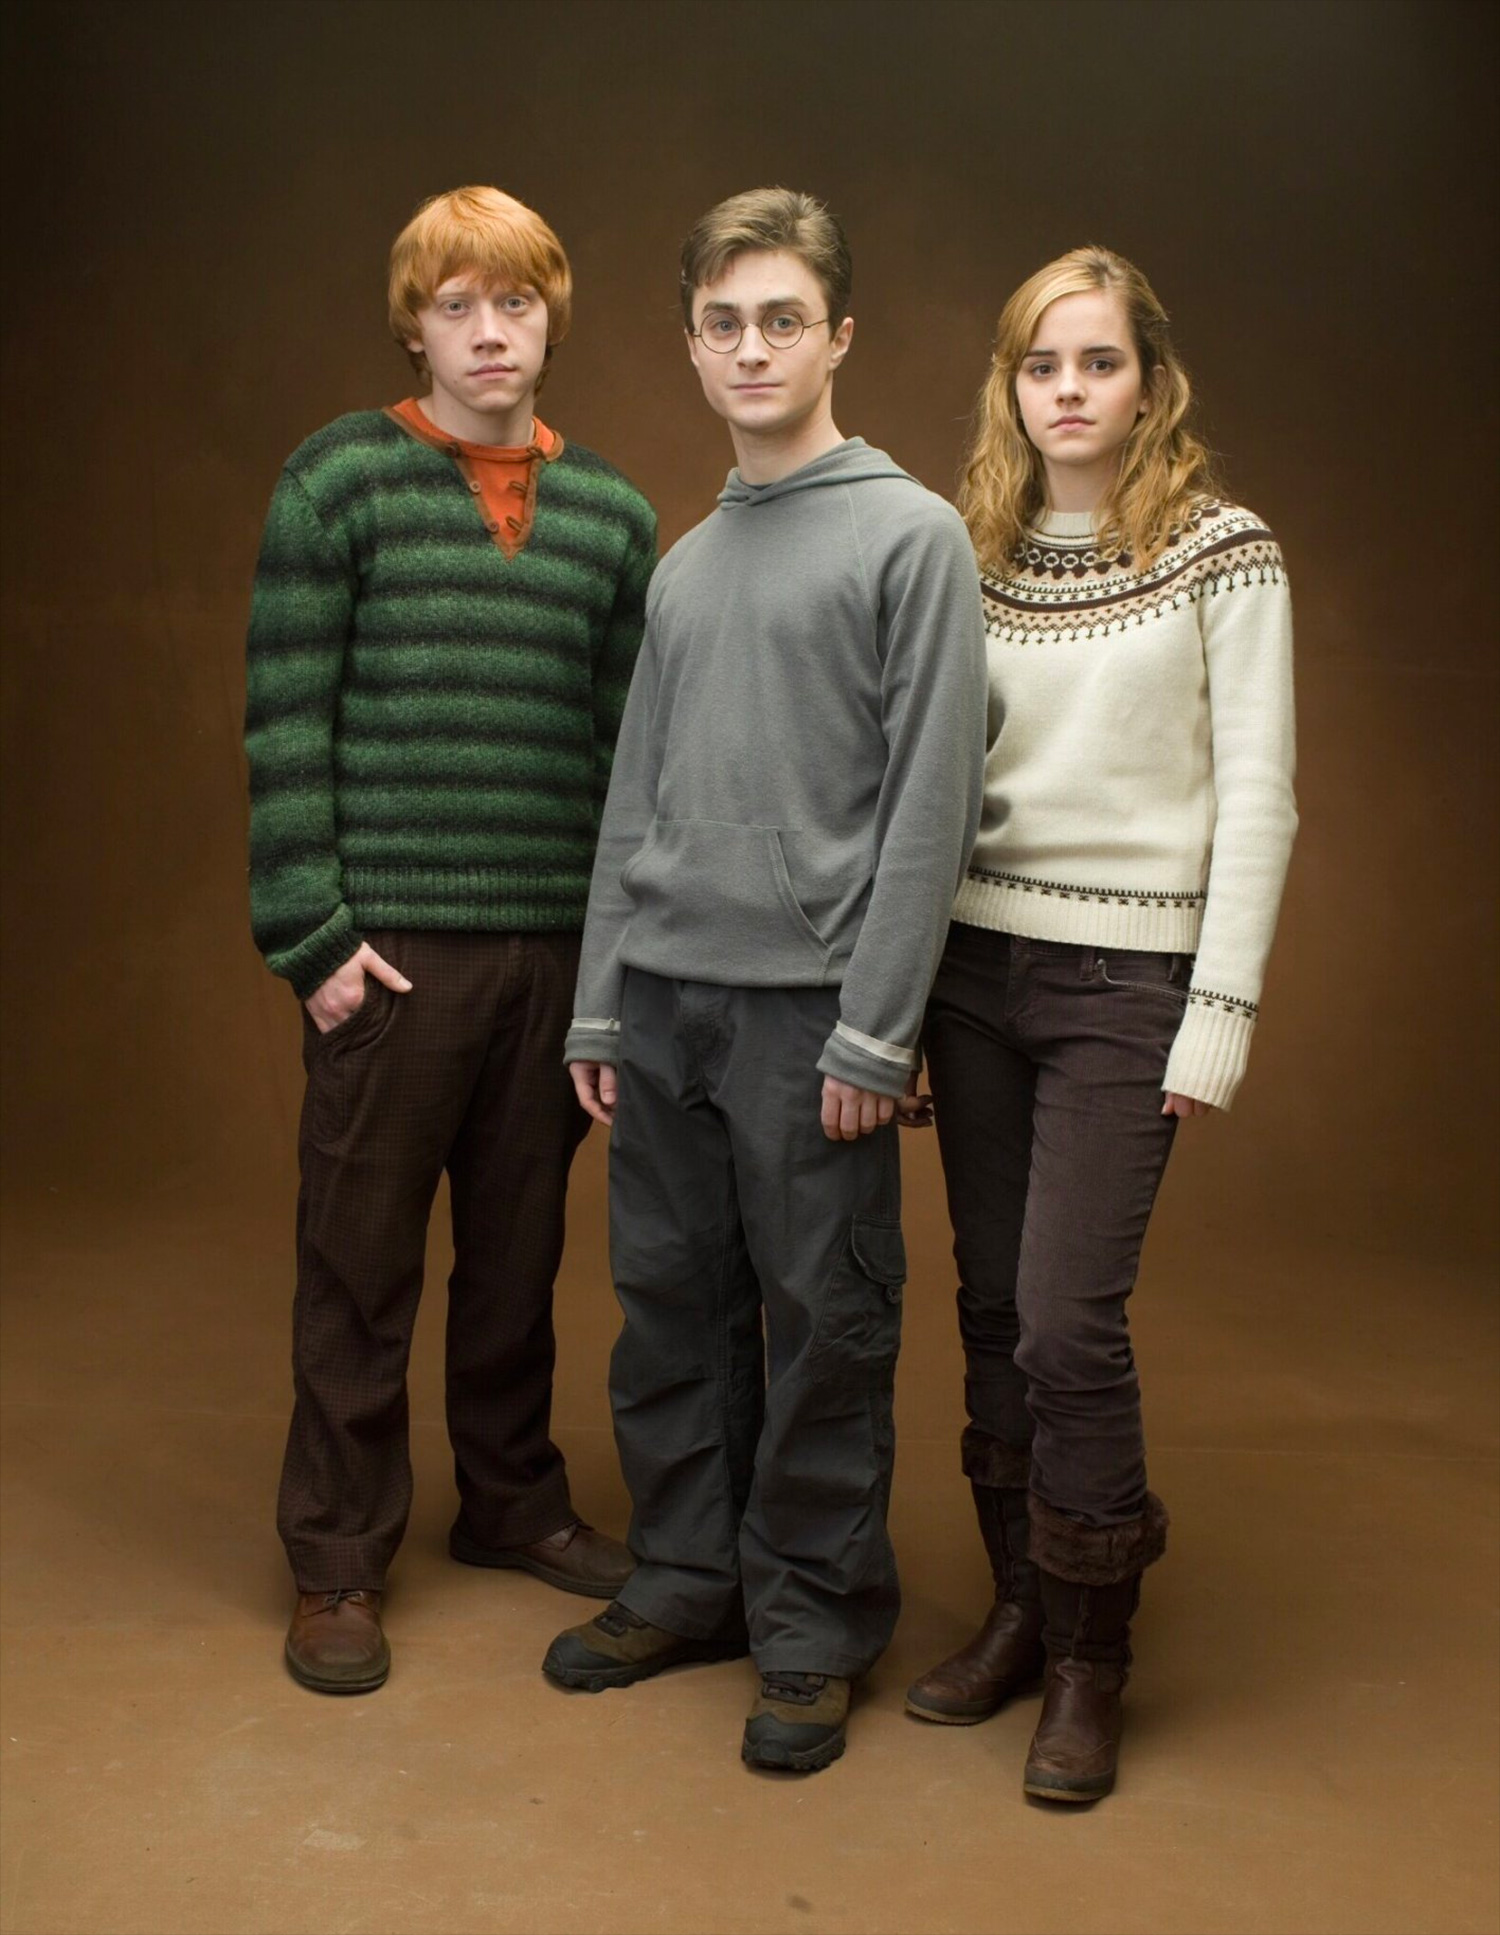 Portrait of Ron, Harry and Hermione